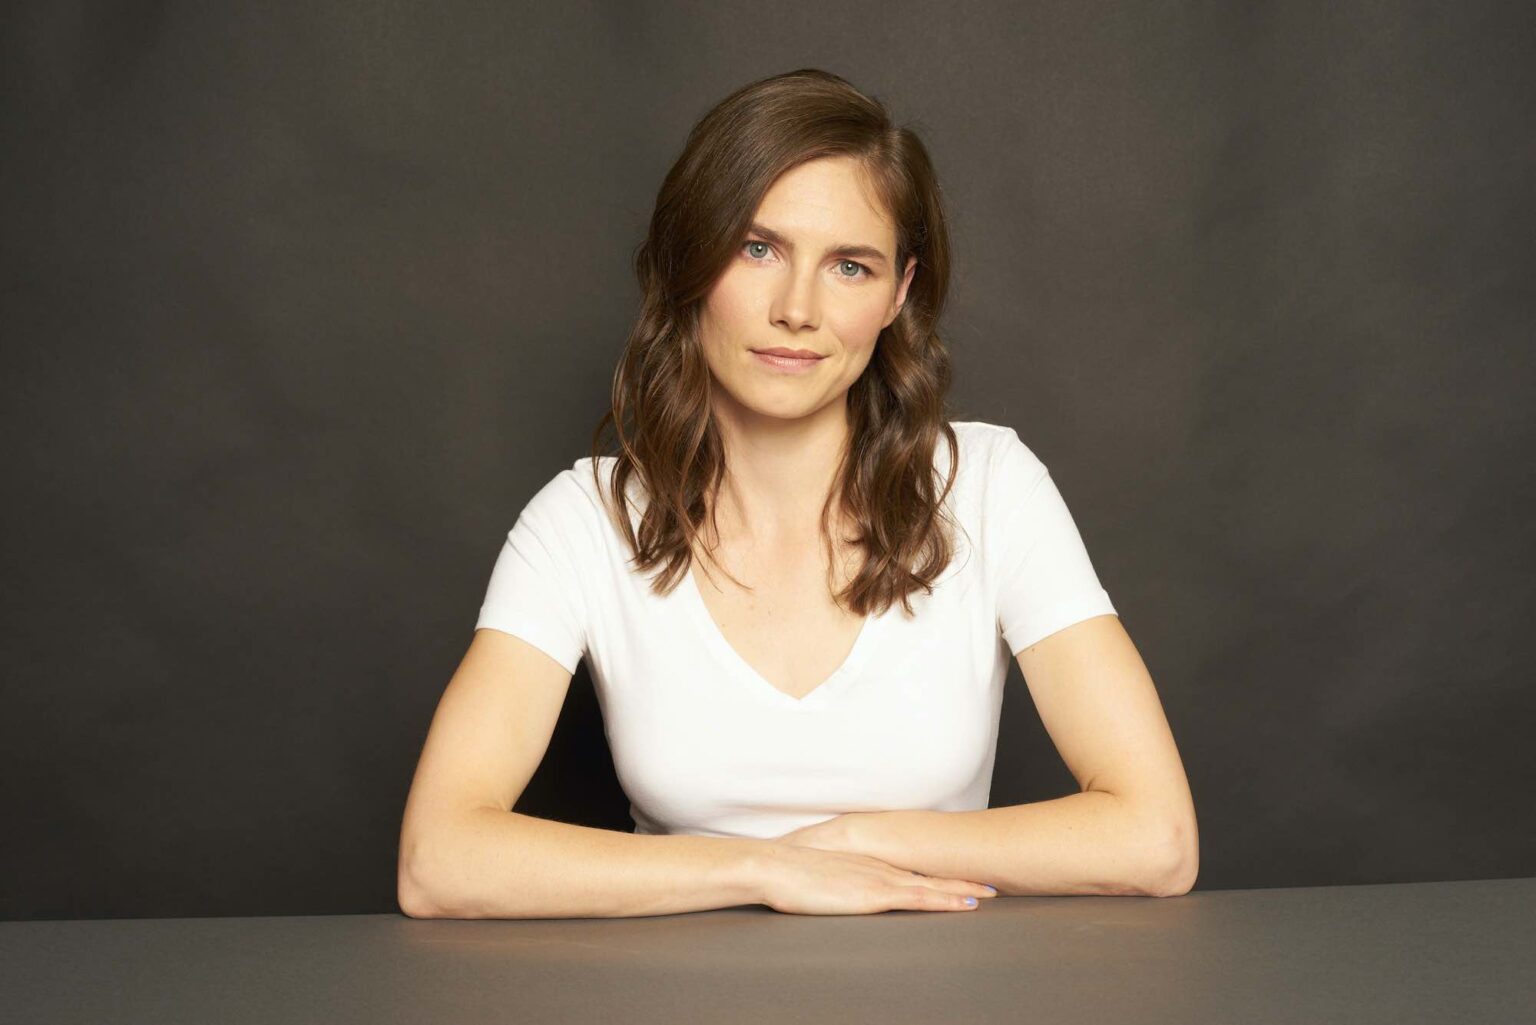 Where is Amanda Knox now? Learn all about the author's issues with 'Stillwater', which draws heavily from her own true crime story.